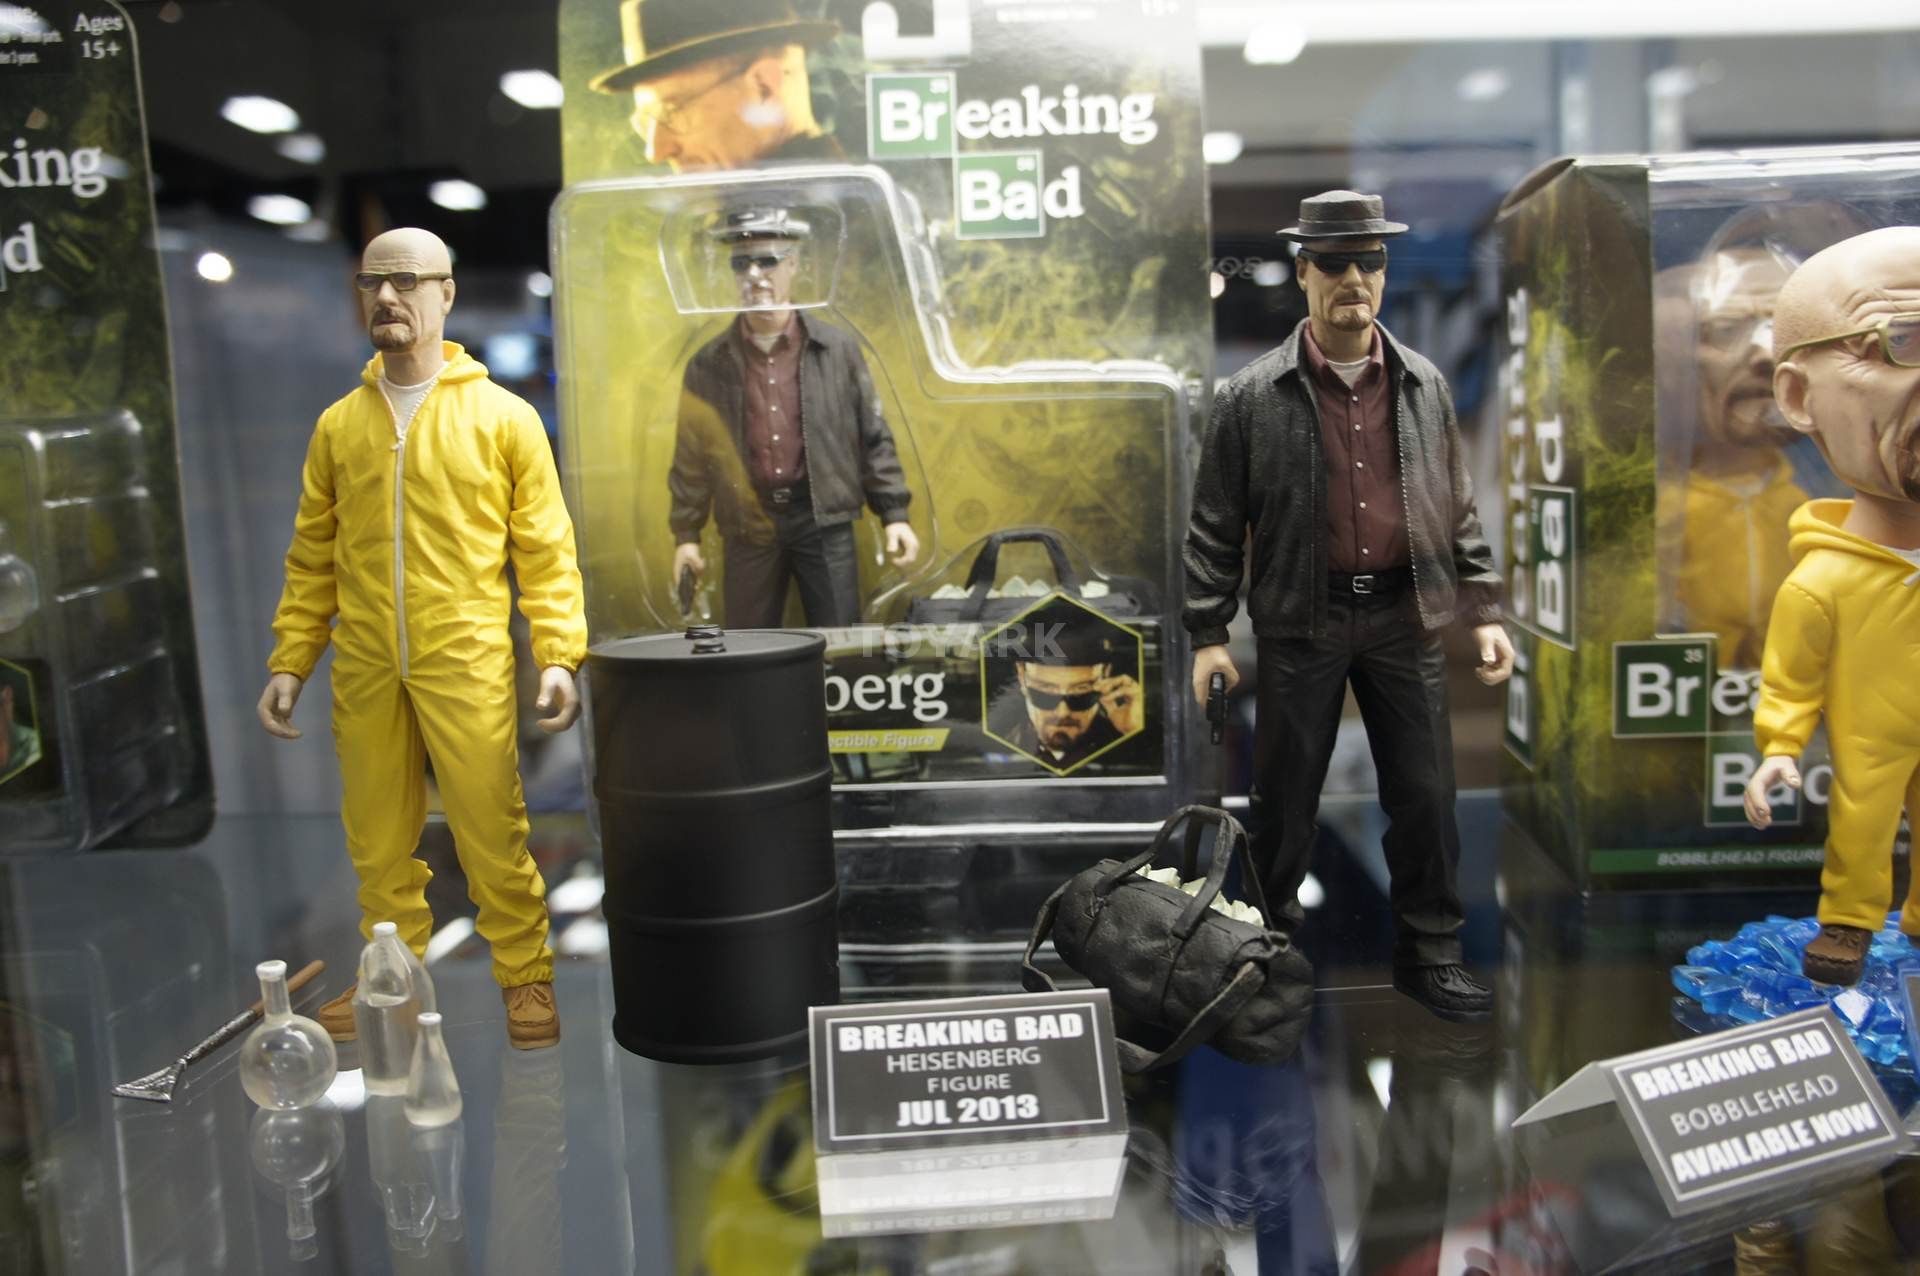 heisenberg mad as breaking bad action figures pulled from toys r us after online petition image 1